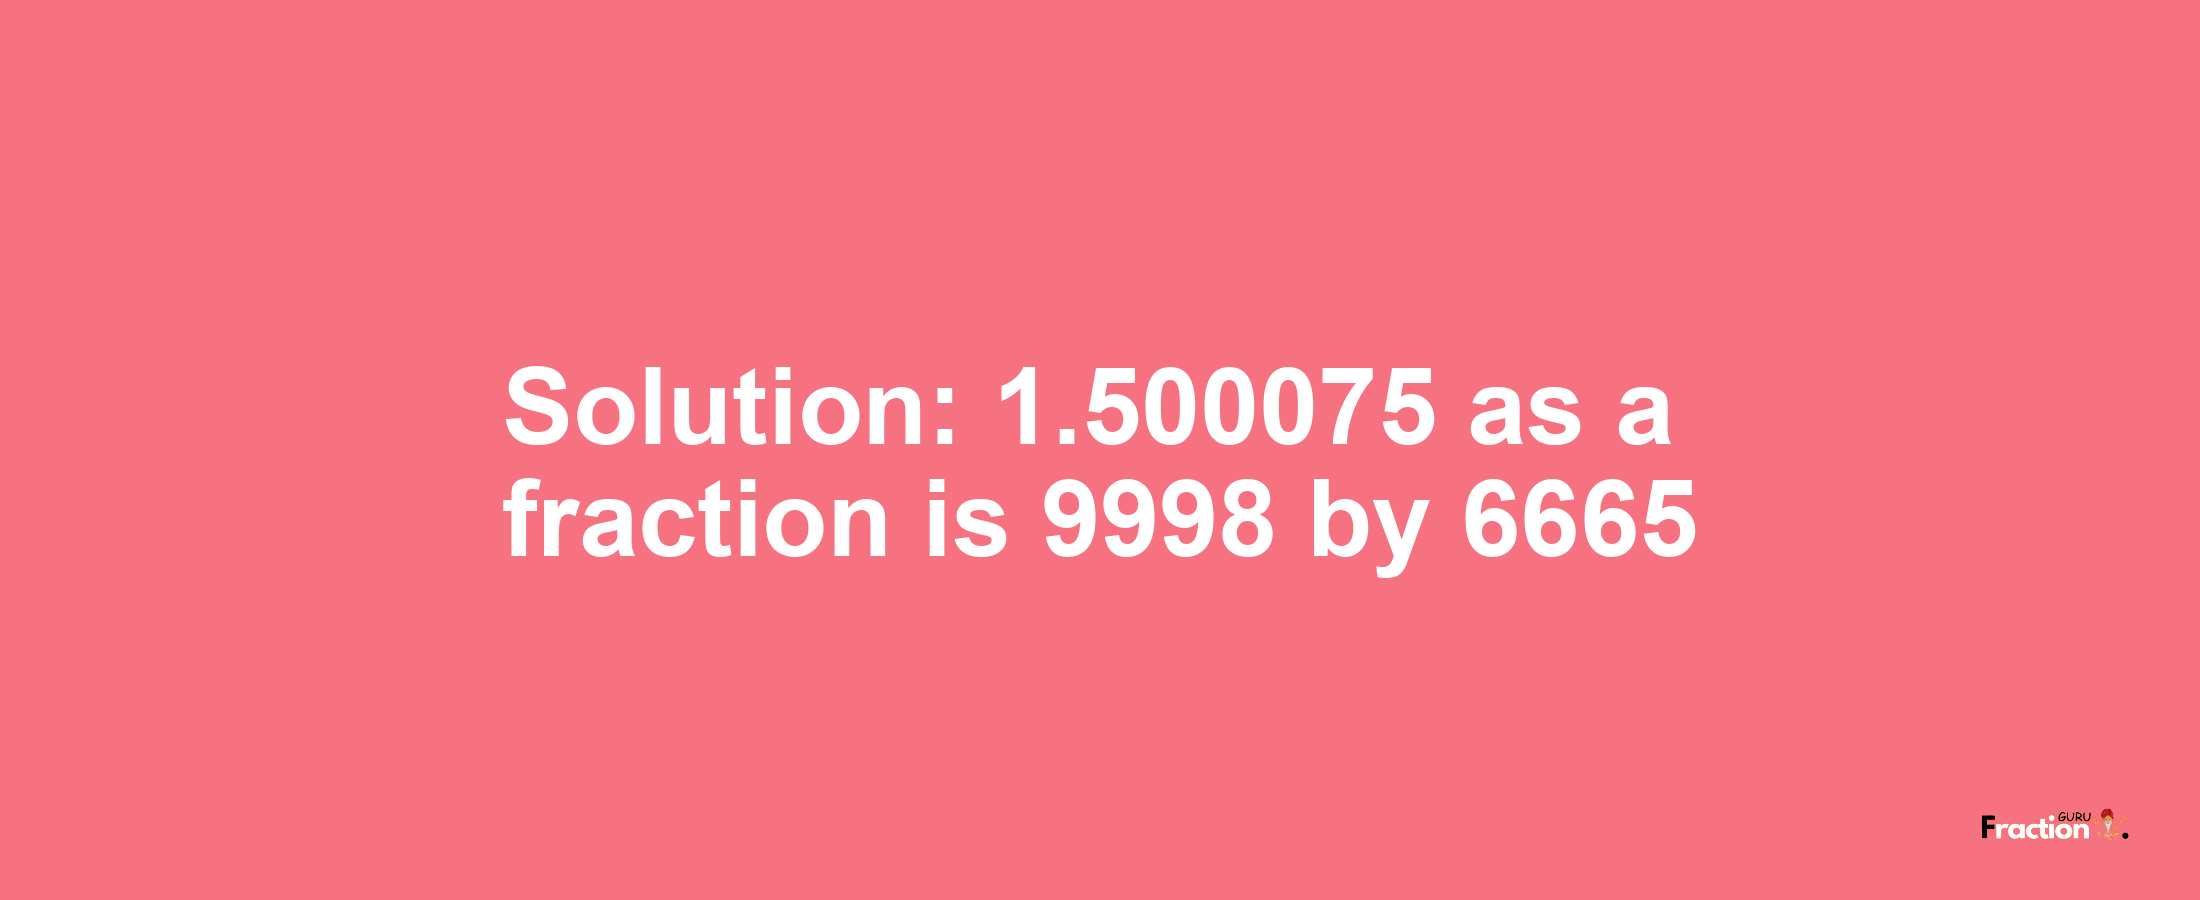 Solution:1.500075 as a fraction is 9998/6665